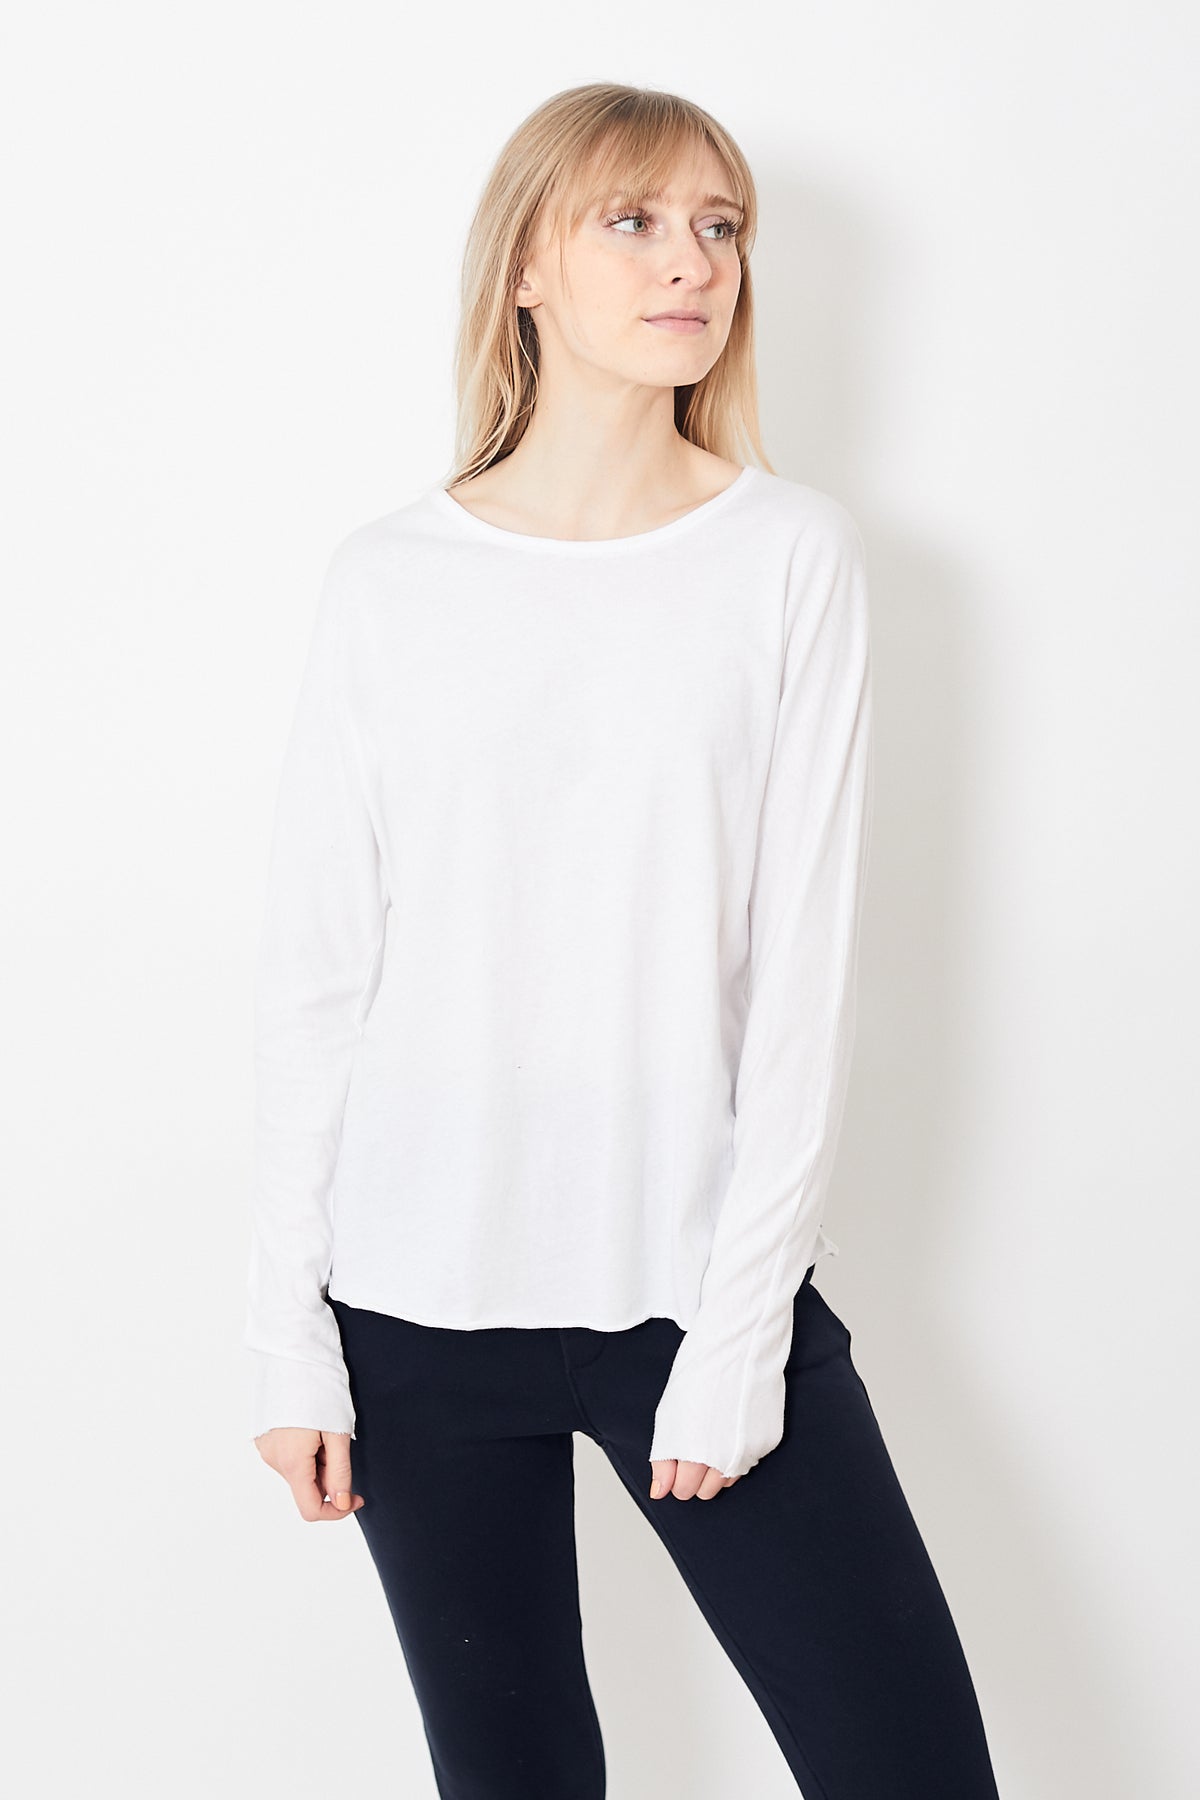 Frank Eileen Tee Lab Continuous Sleeve Tee Grethen House